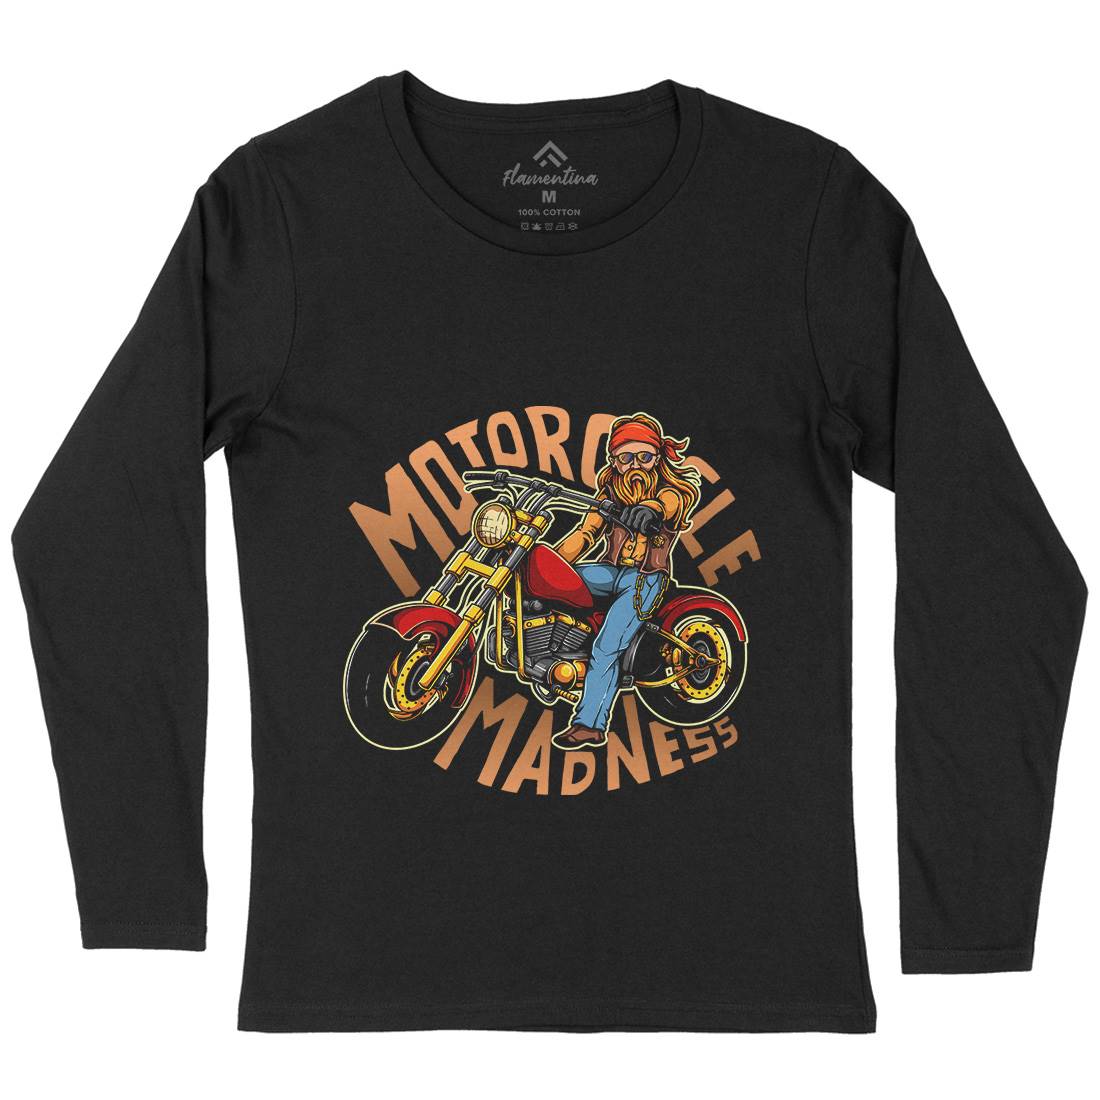 Madness Womens Long Sleeve T-Shirt Motorcycles A438